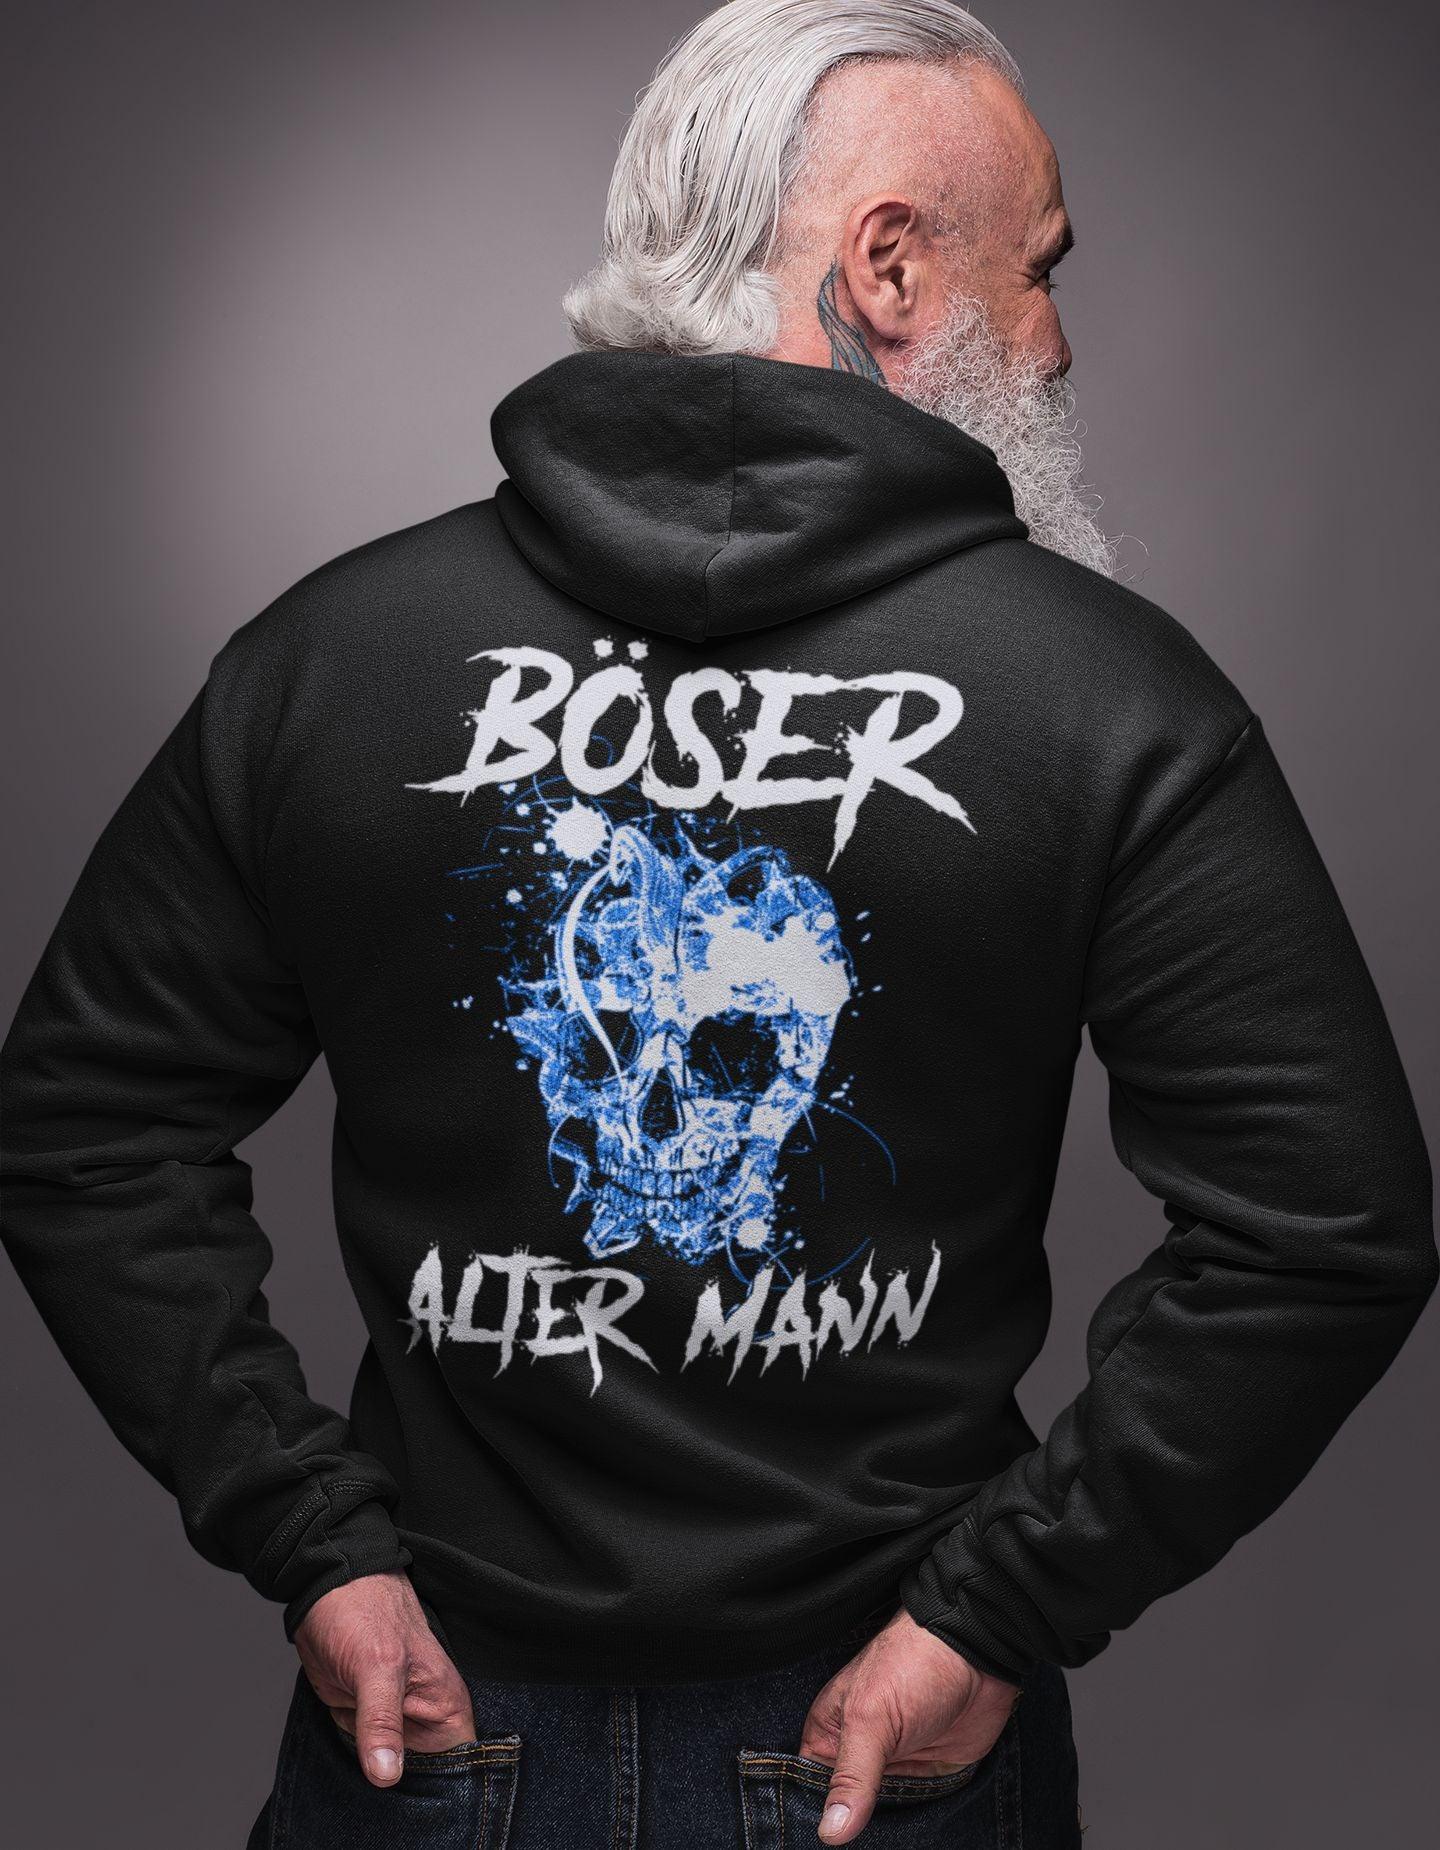 Böser alter Mann - Backprint Hoodie - Totally Wasted